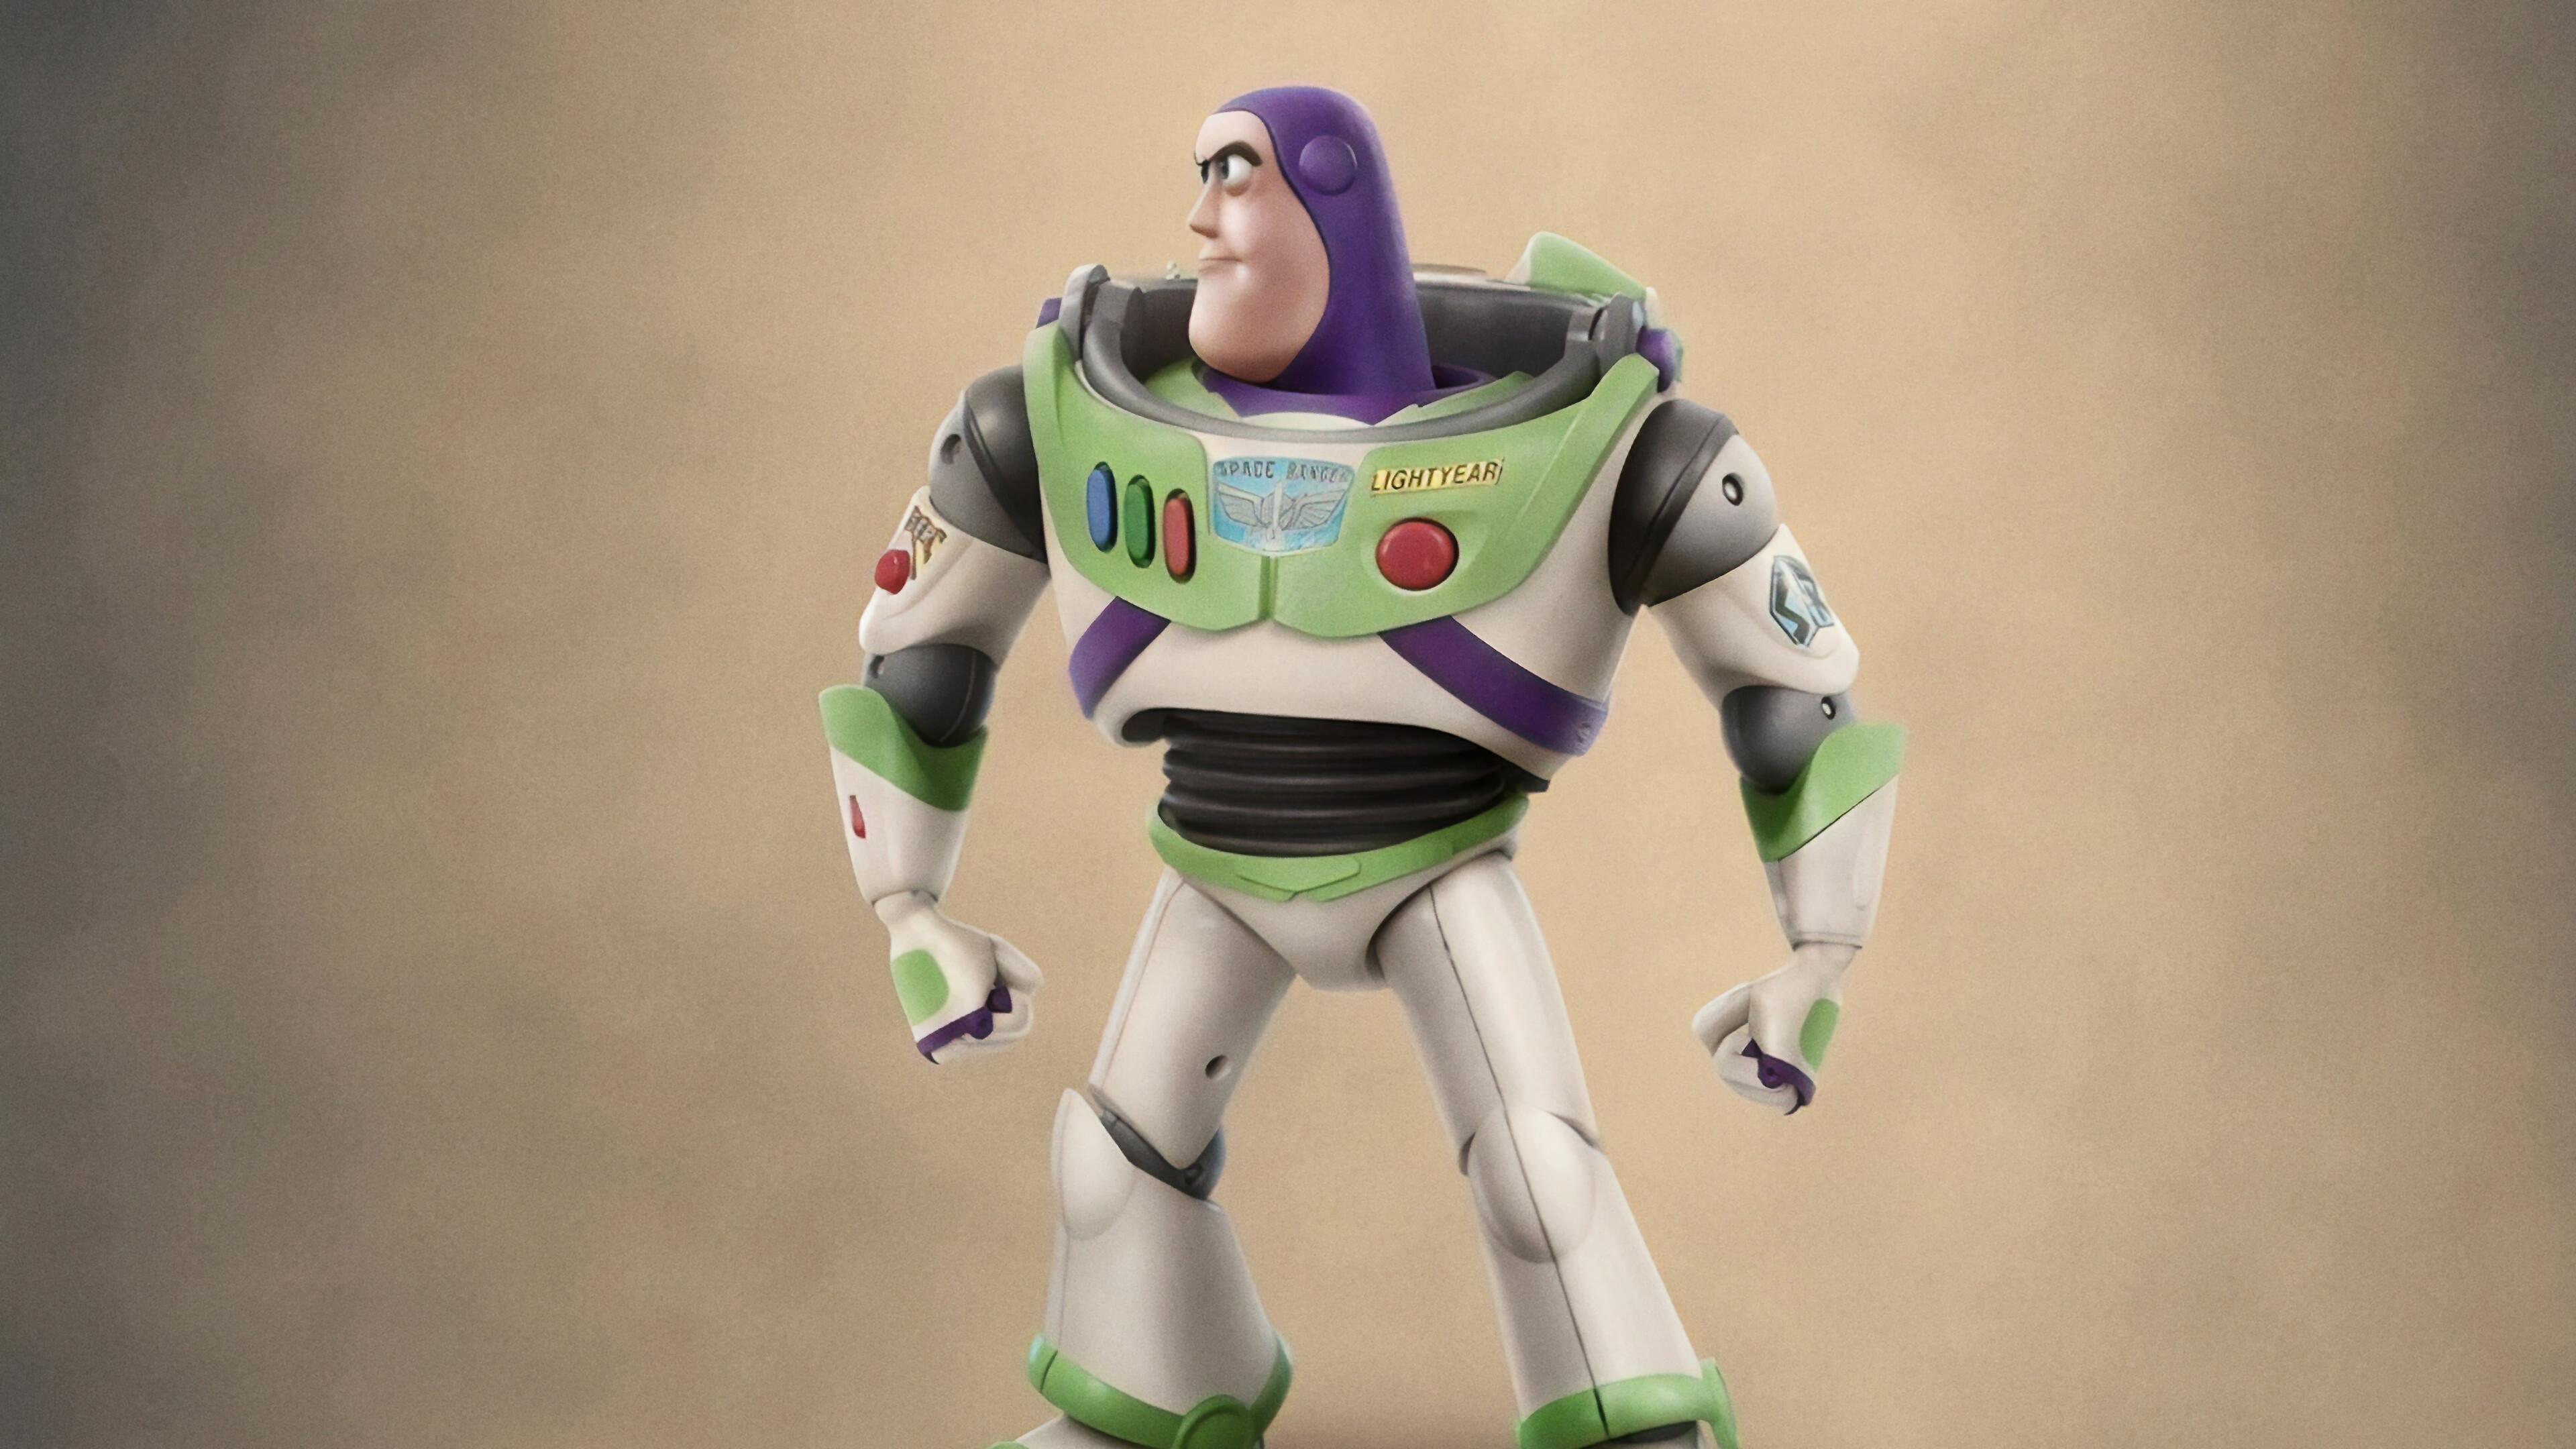 Toy Story: Buzz Lightyear, a modern-day "Space Ranger" action figure. 3840x2160 4K Background.